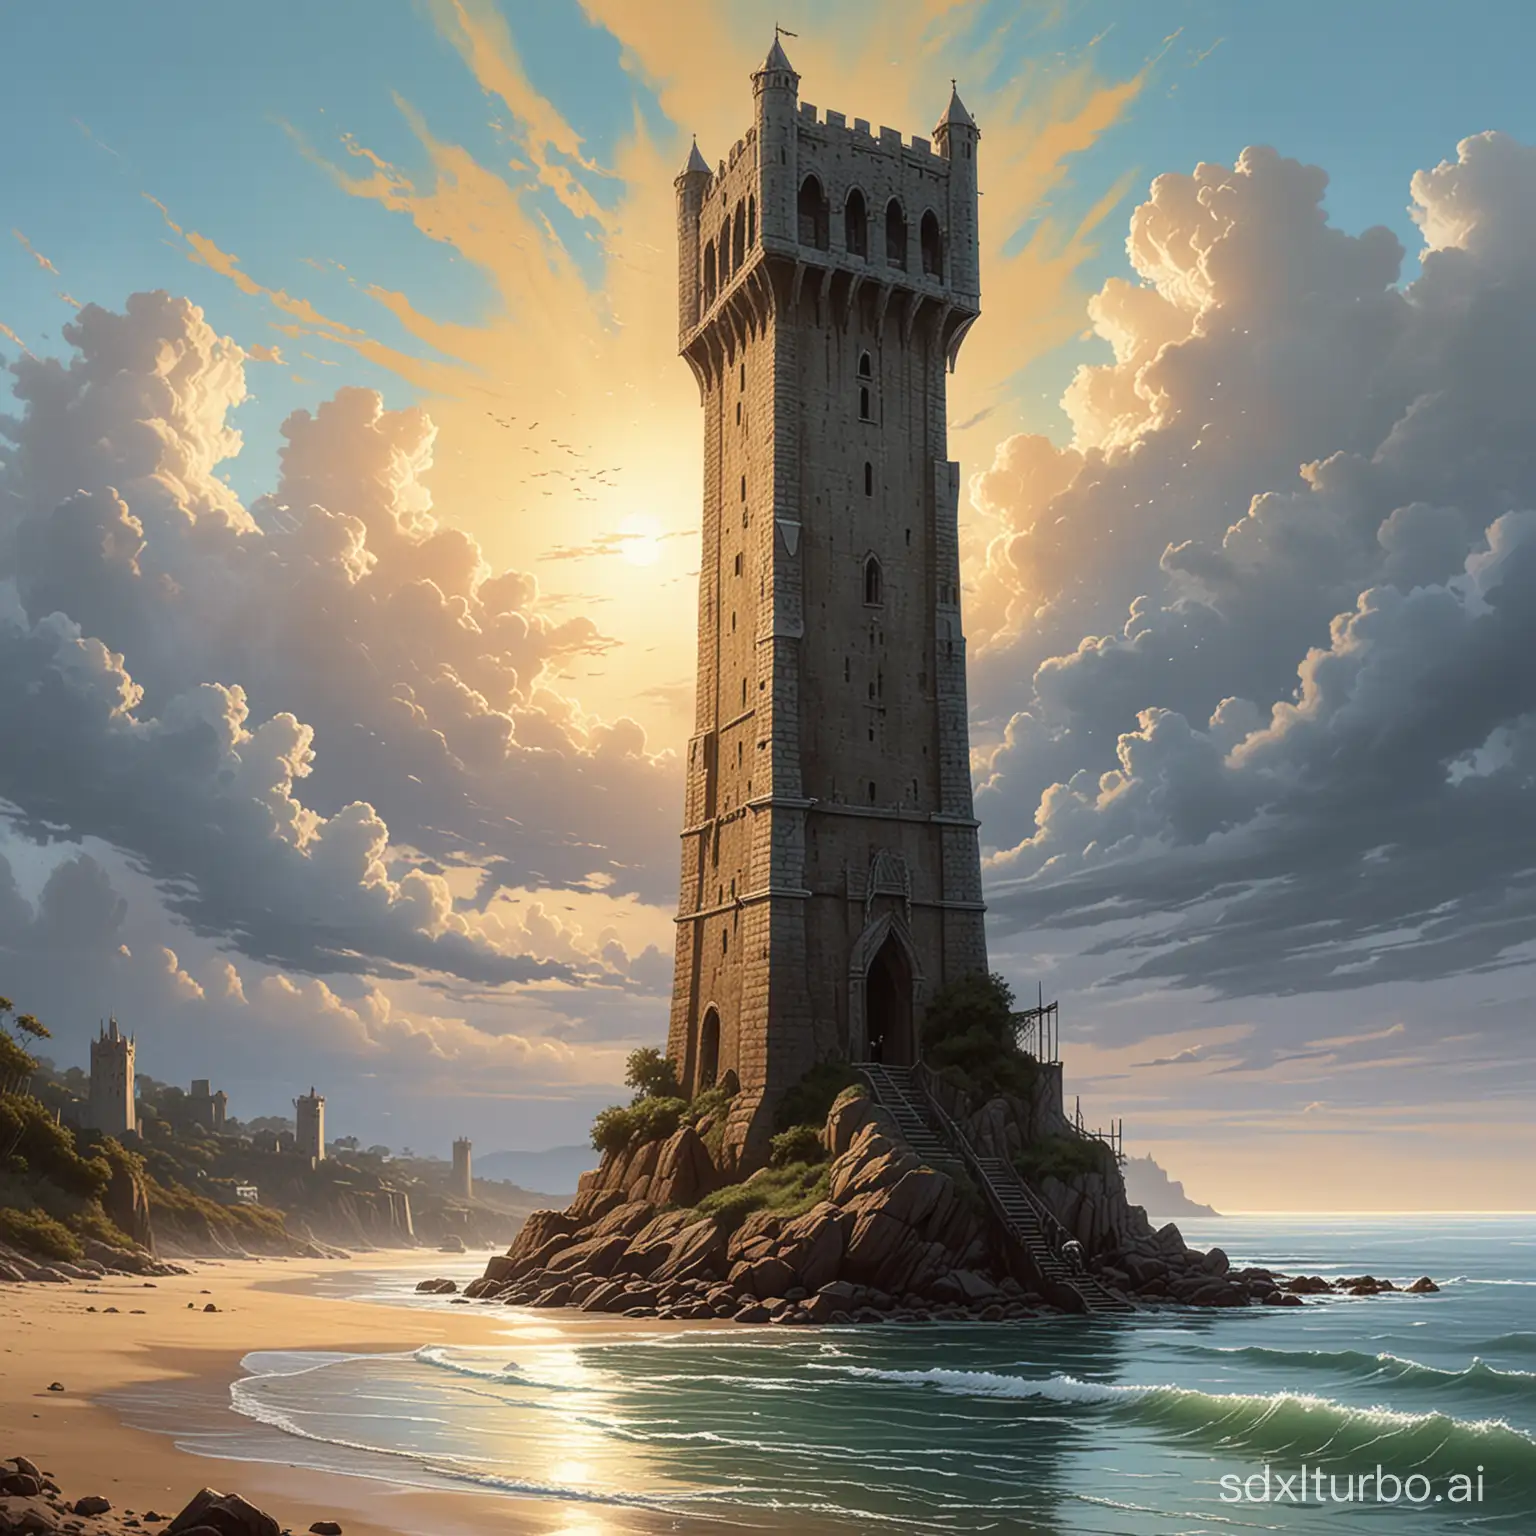 In the art style of Michael Whelan, generate an image of a tall, medieval metallic tower that wide flat head. The tower sits beside the sea.